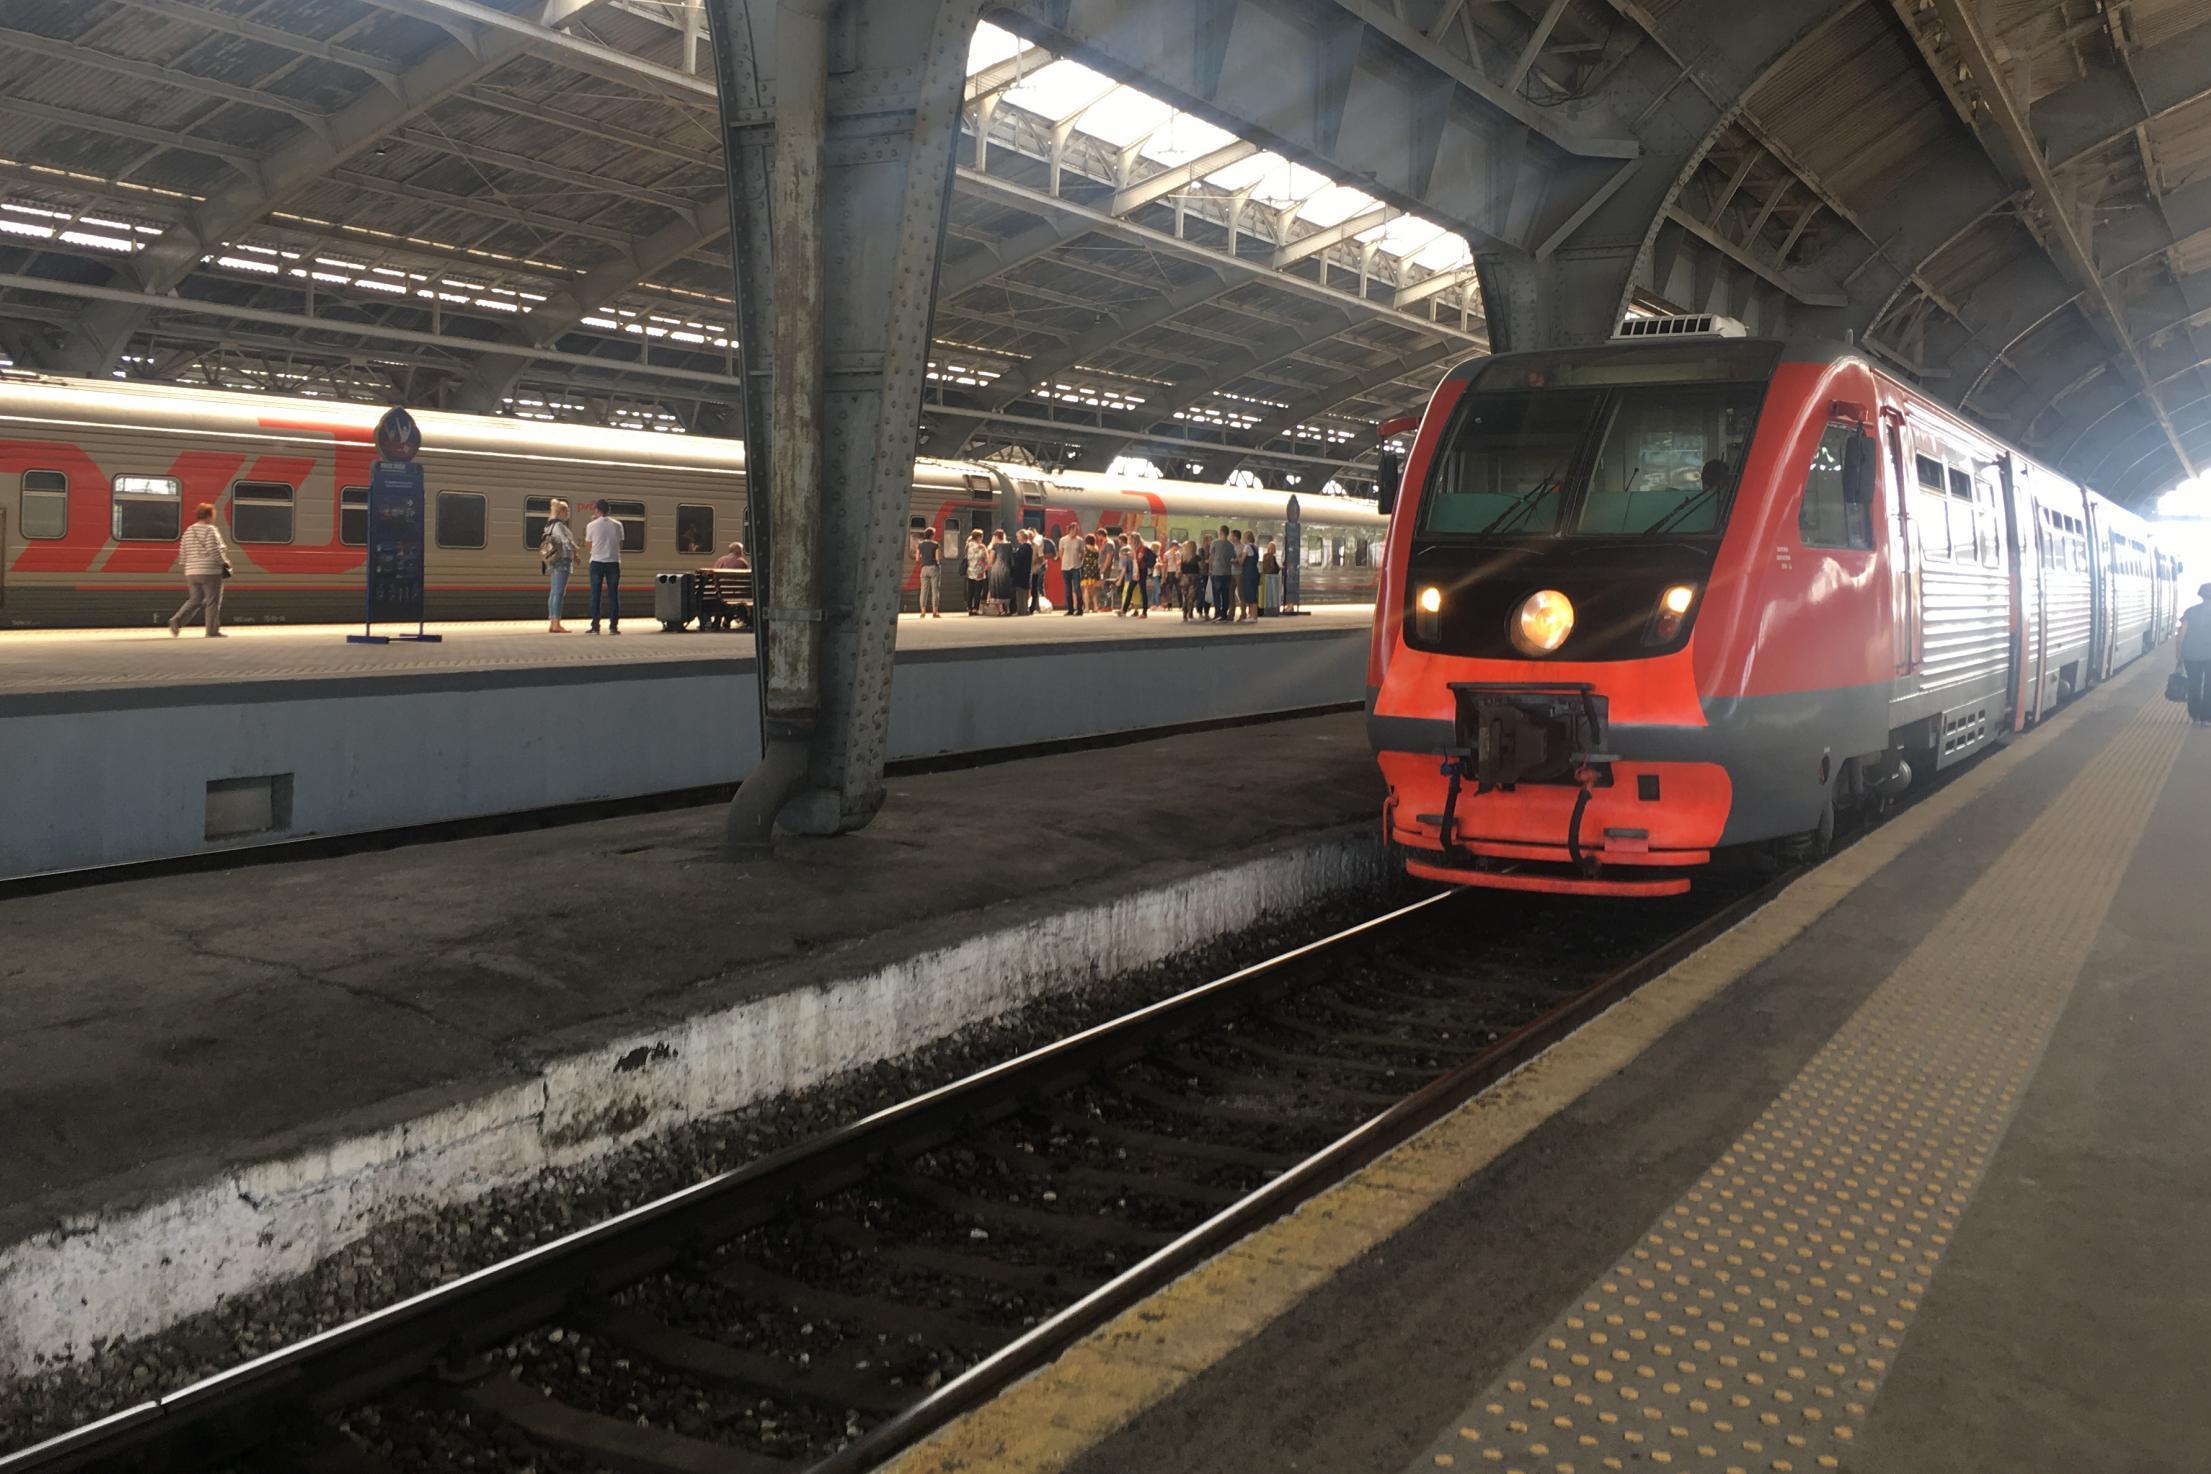 End of the line: Kaliningrad's main station in westernmost Russia